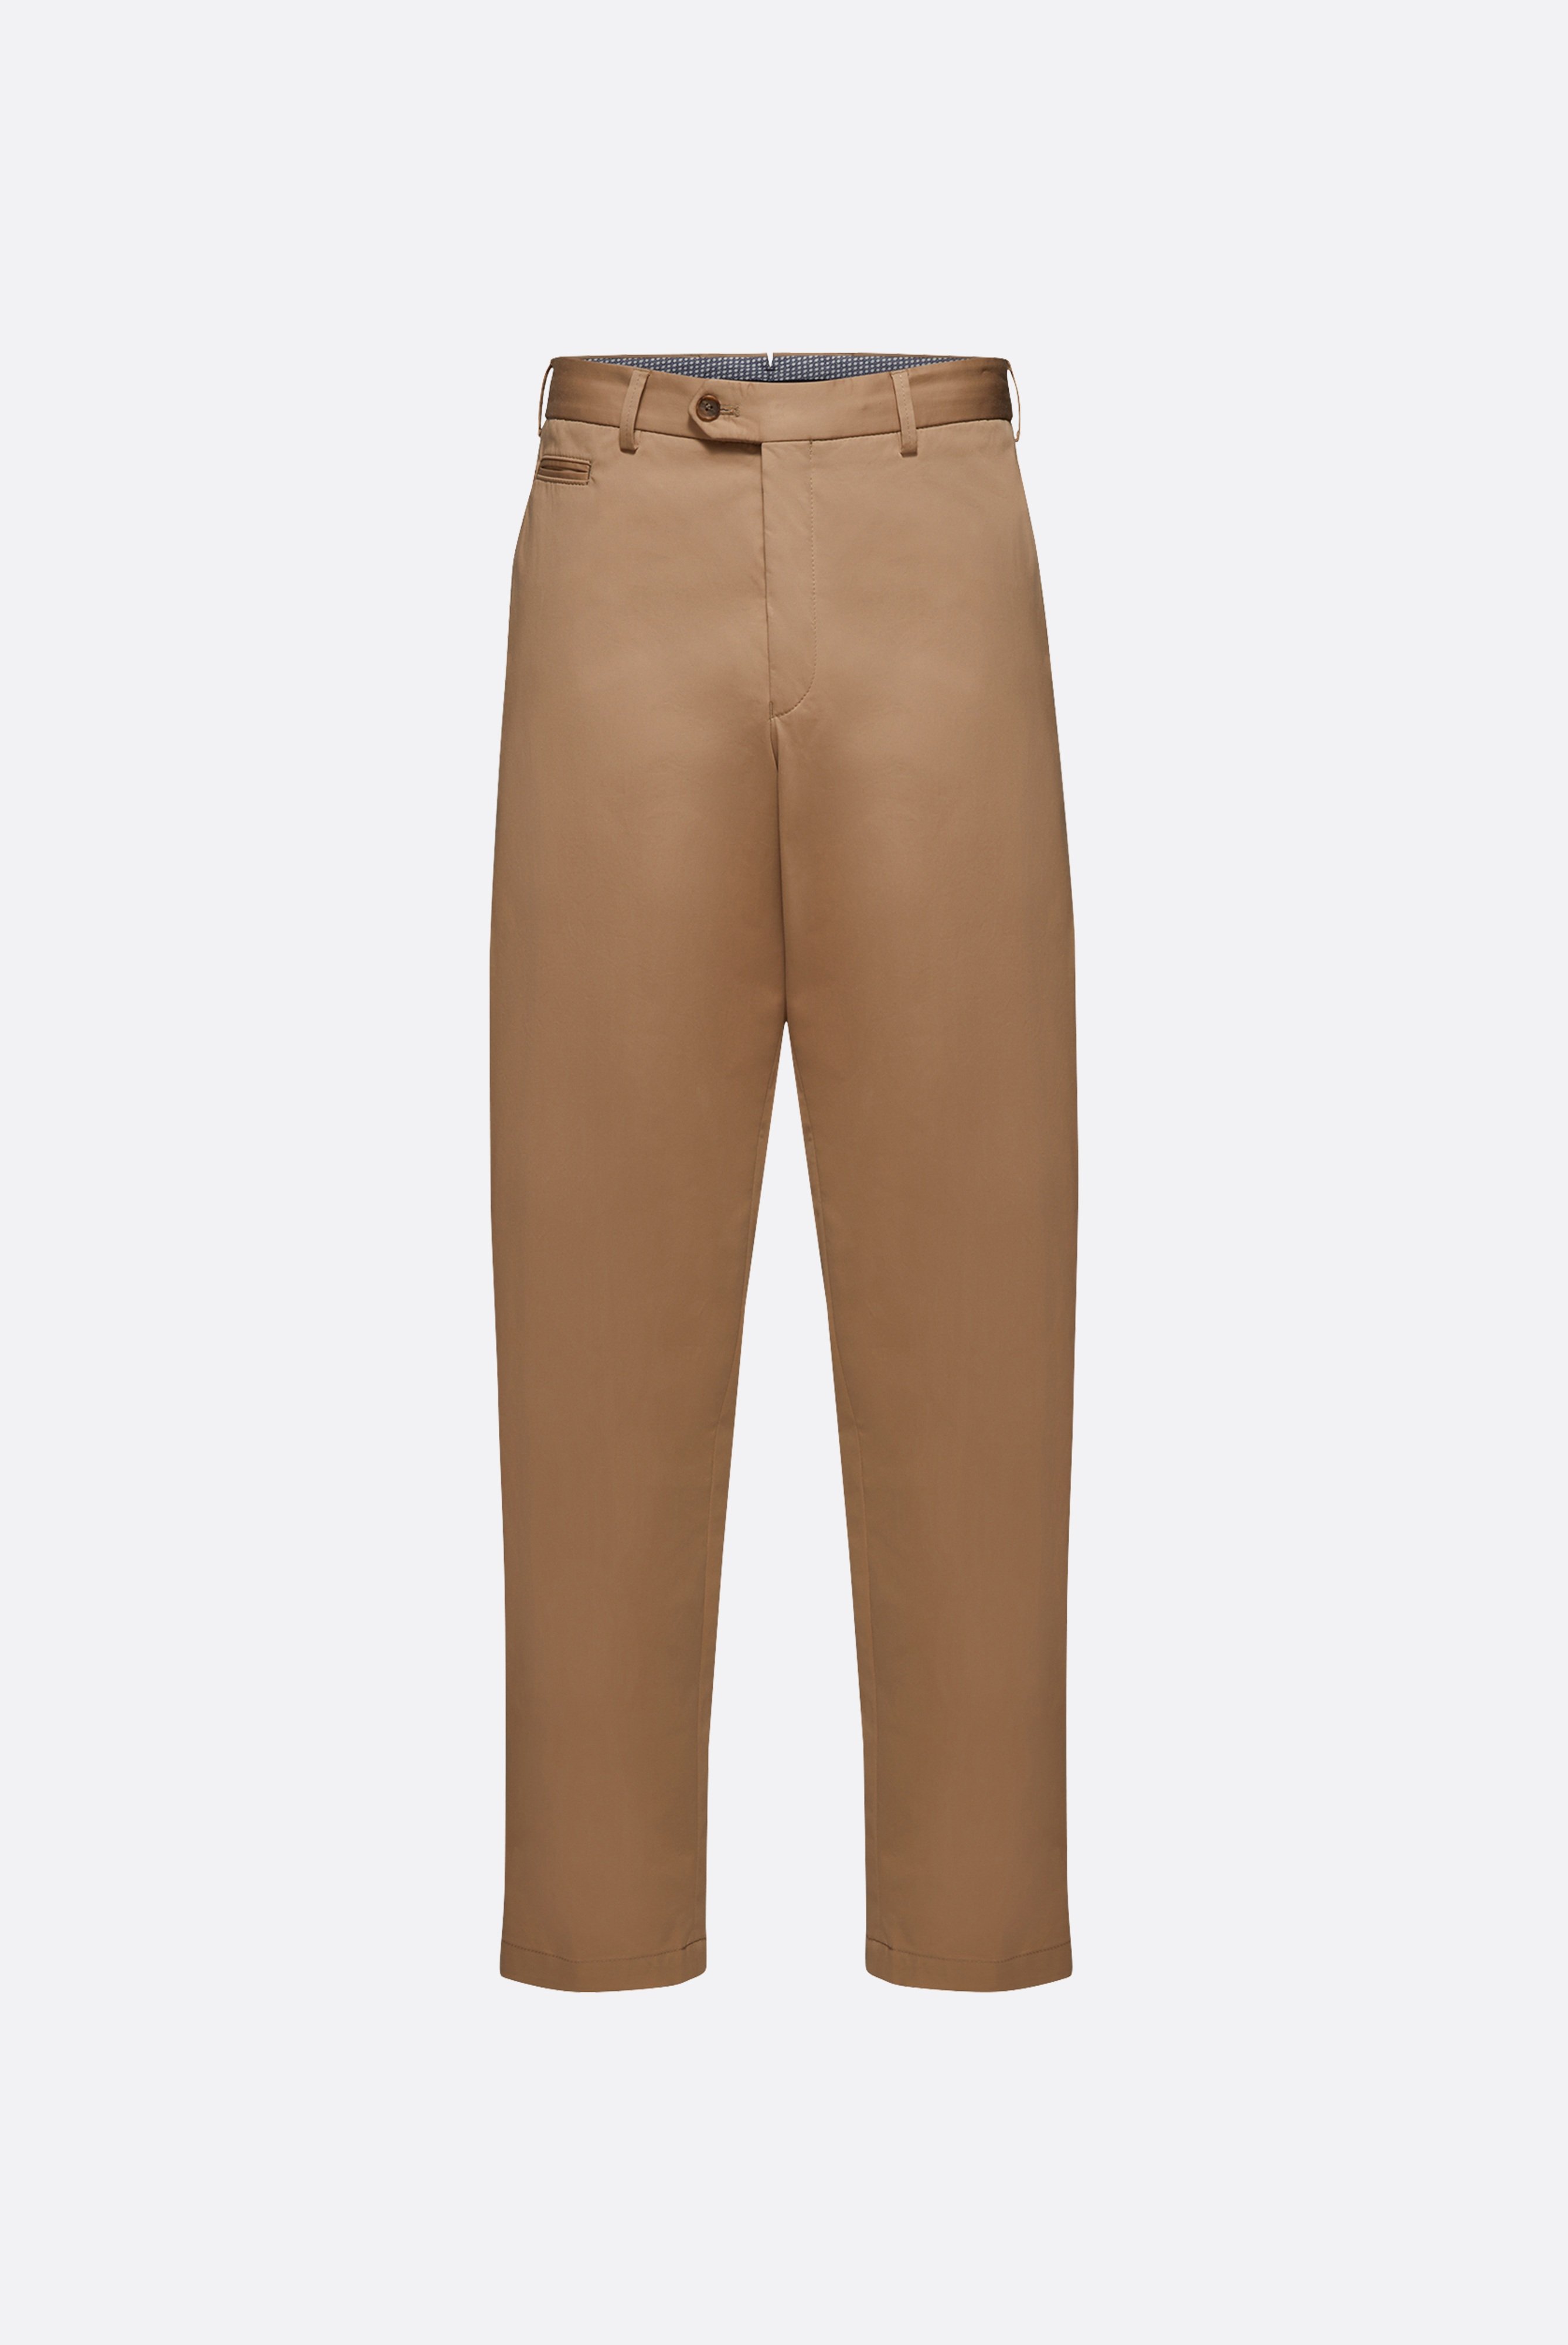 Jeans & Trousers+Straight-Leg Chinos with Stretch+80.7844..J00151.140.46